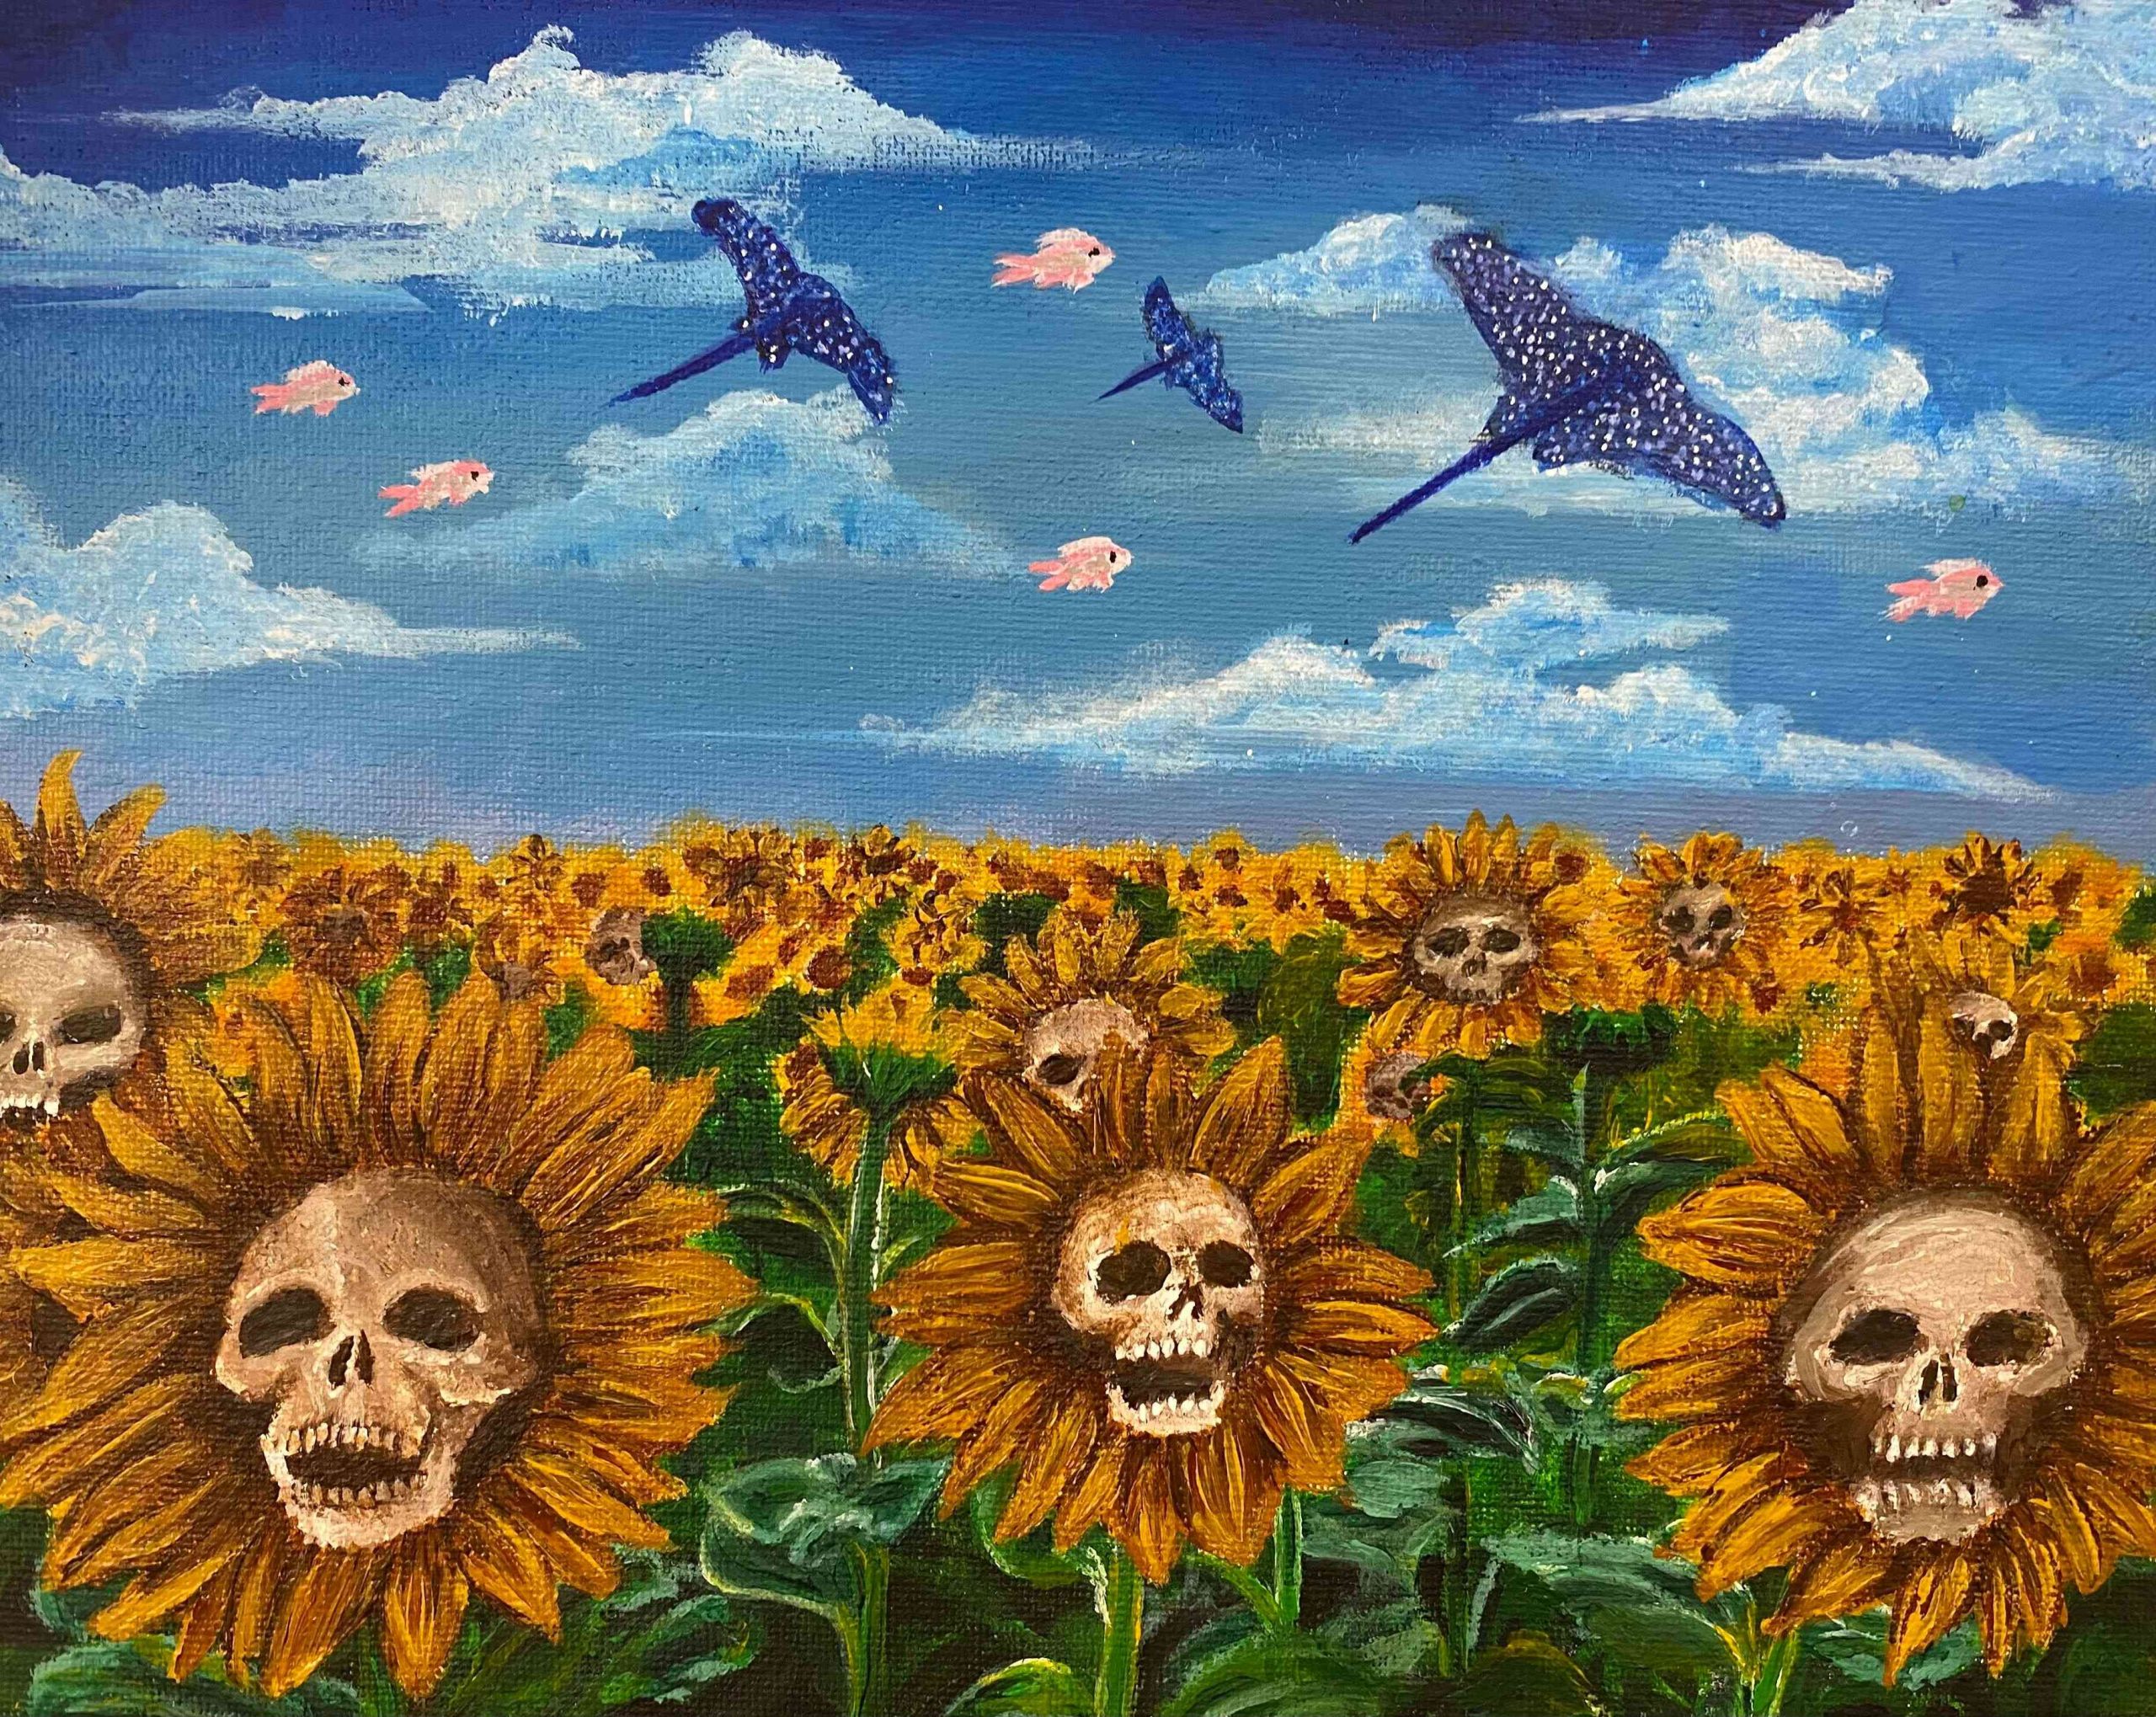 Sunflowers on a field with their seeds as skulls